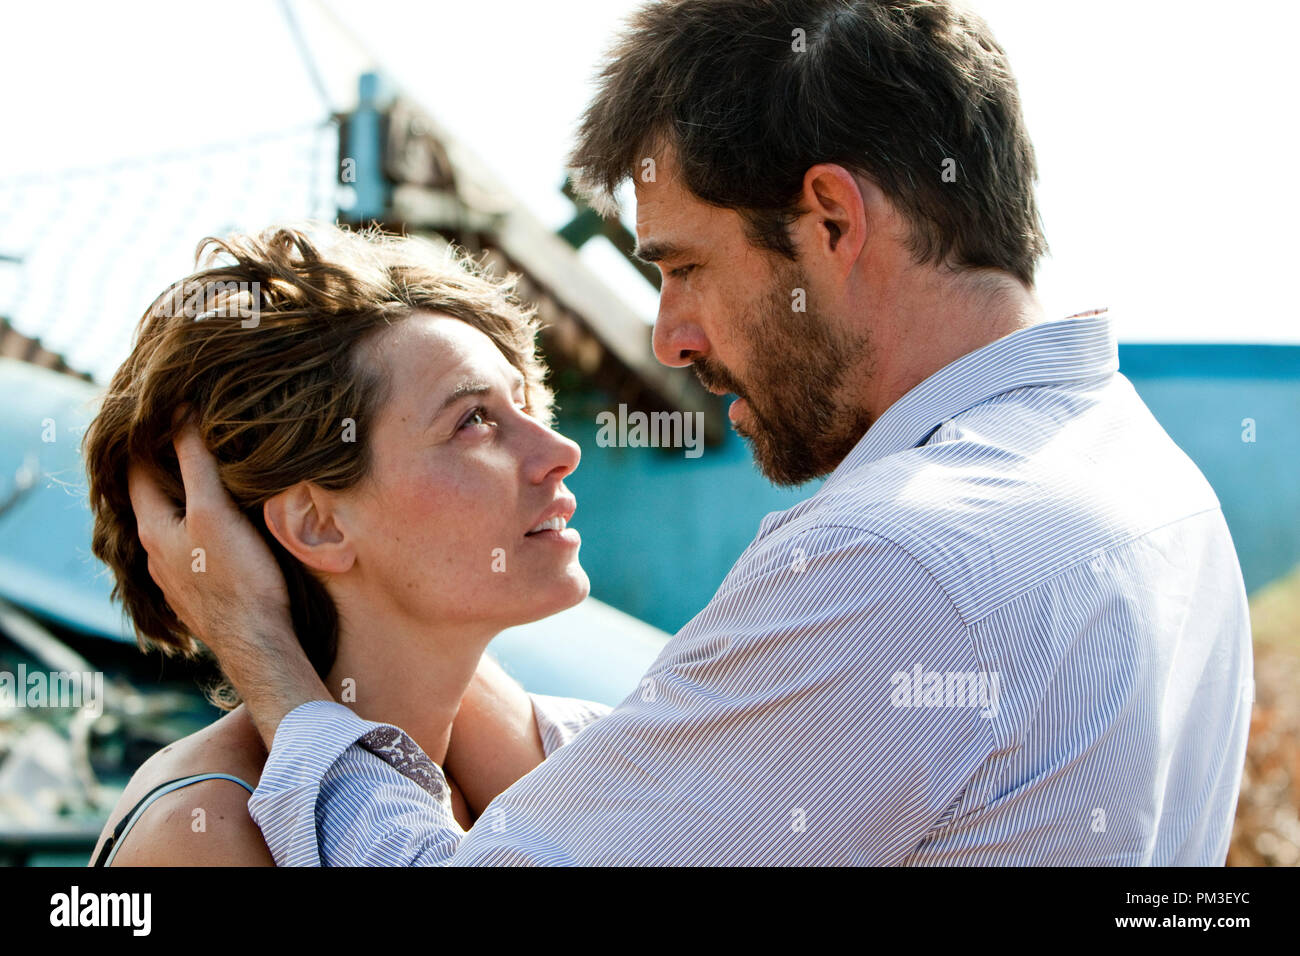 (L-r) CÉCILE de FRANCE as Marie Lelay and THIERRY NEUVIC as Didier in Warner Bros. Pictures’ drama “HEREAFTER,” a Warner Bros. Pictures release. Stock Photo